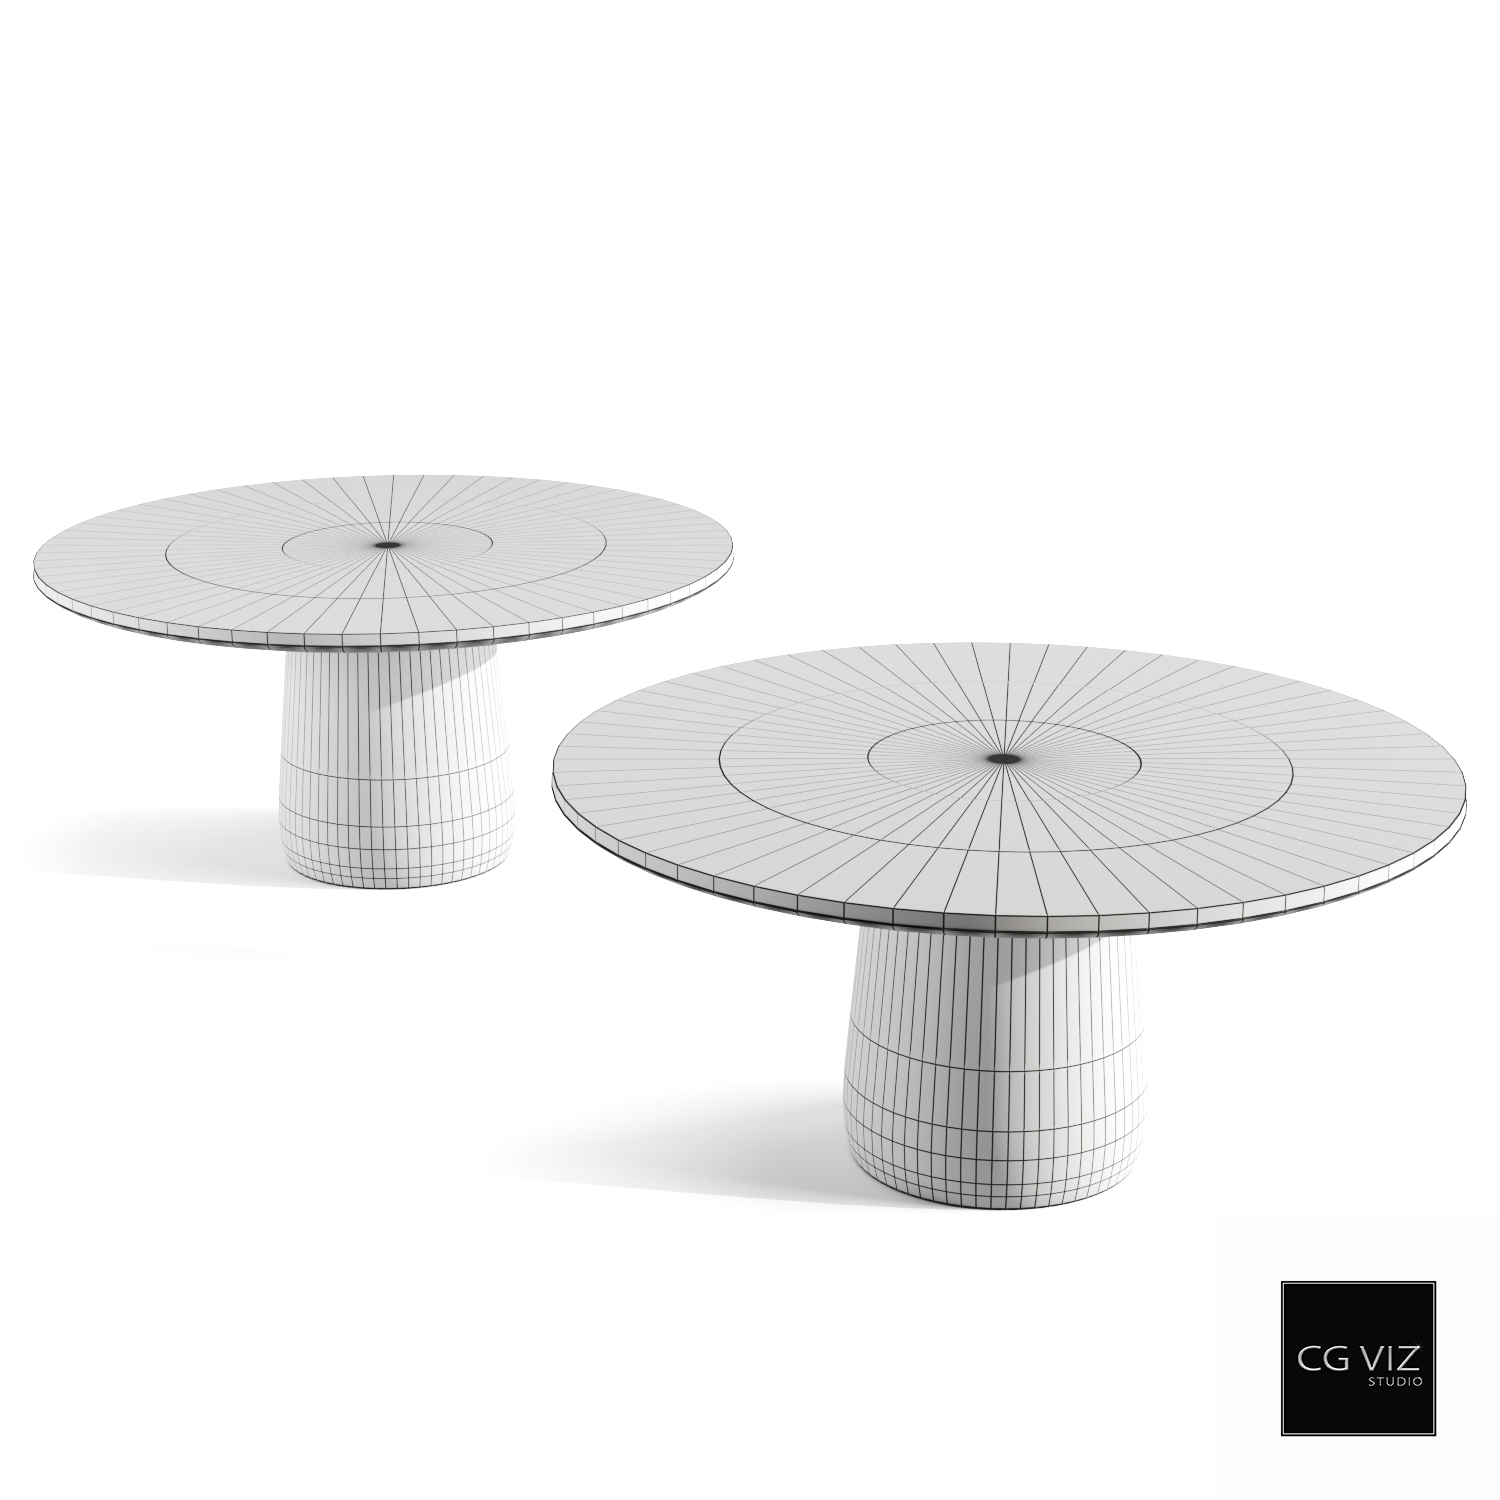 Wireframe View of Roundel Dining Table by CG Viz Studio